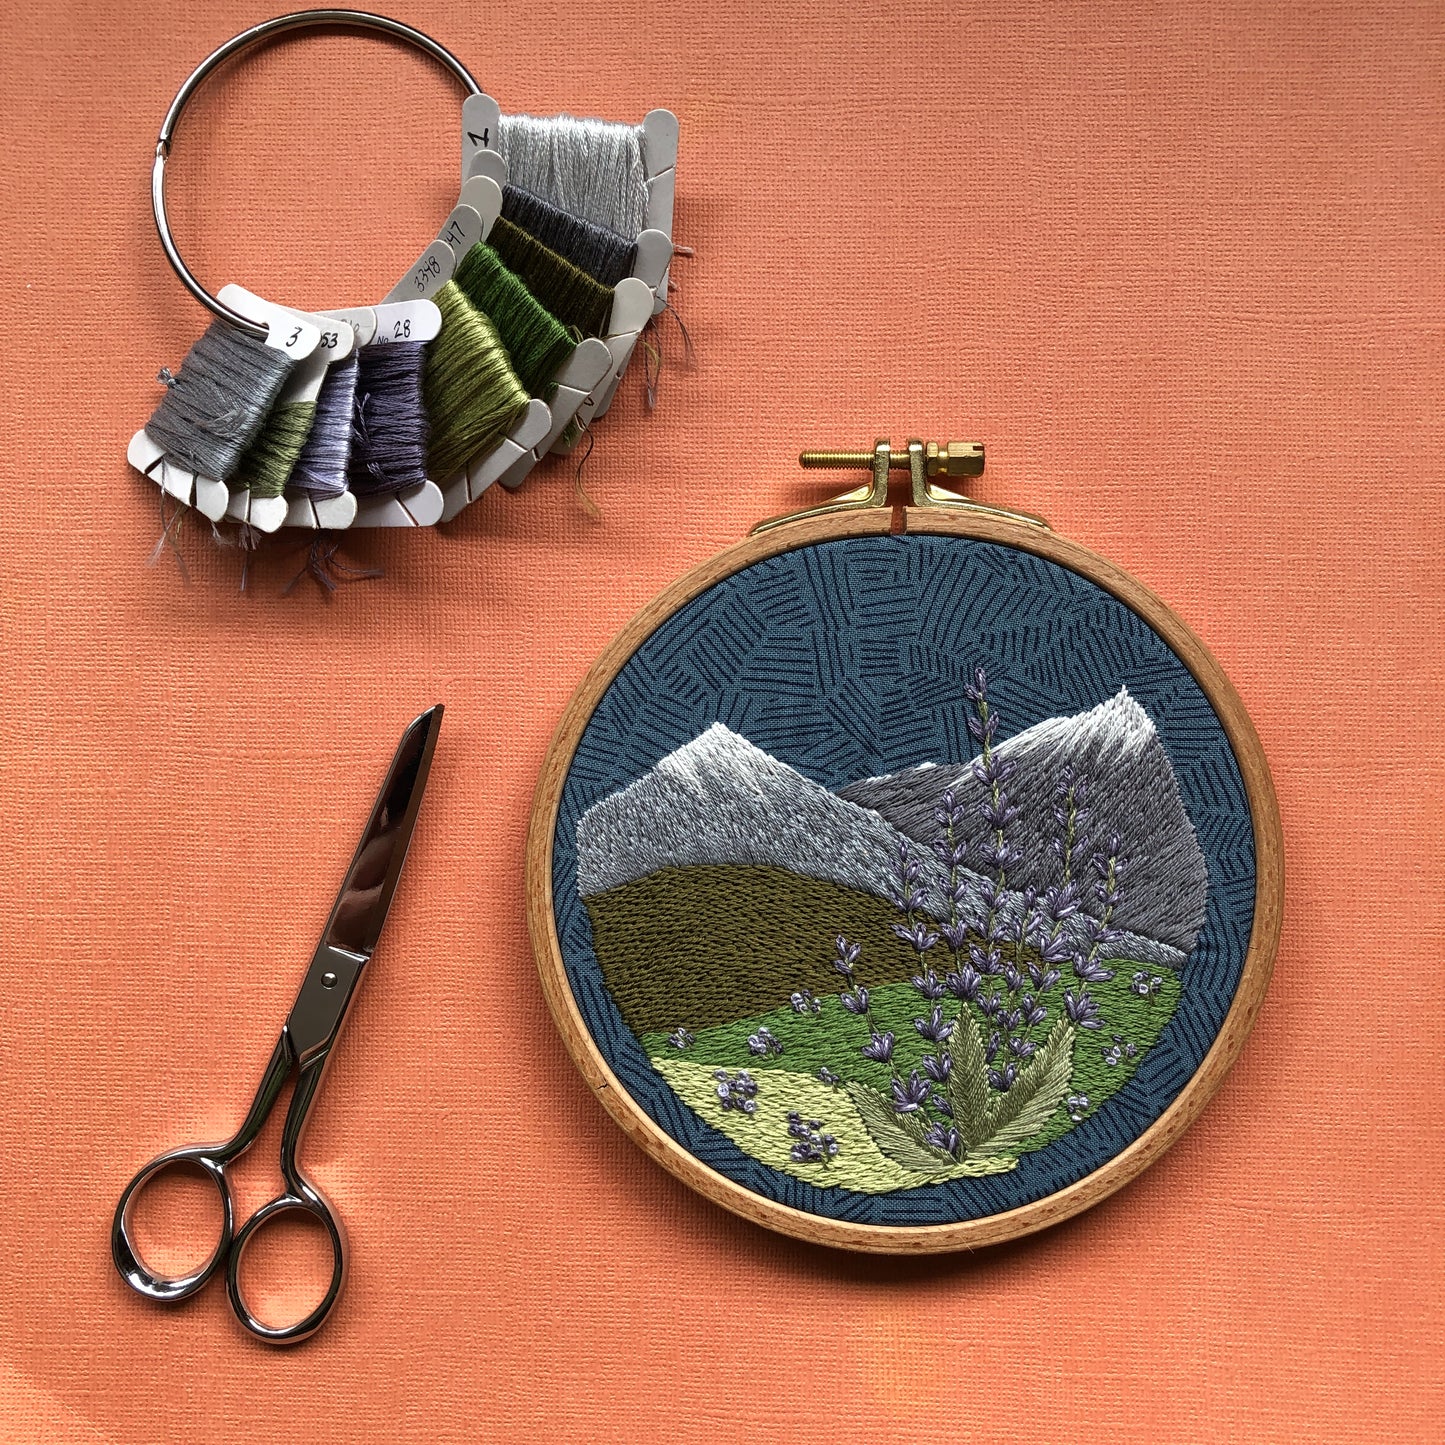 Lavender Fields - Hand Embroidery Pattern PDF